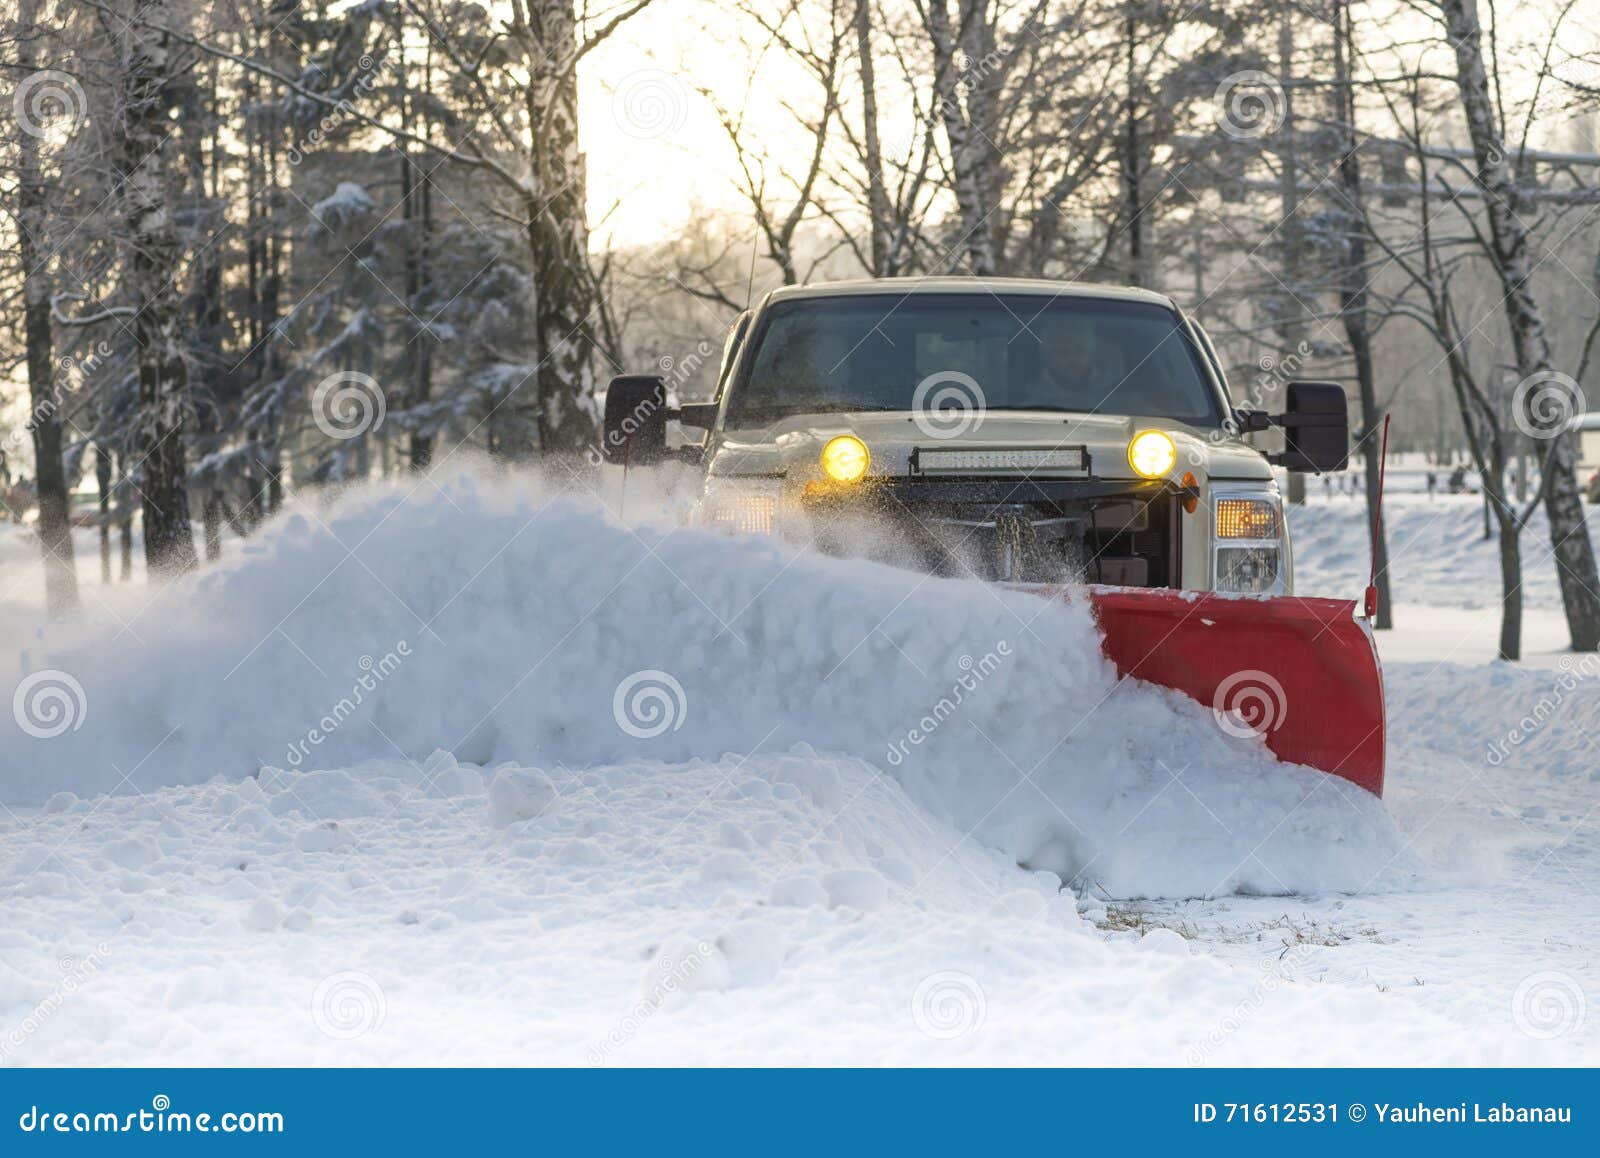 snow plow doing snow removal after a blizzard